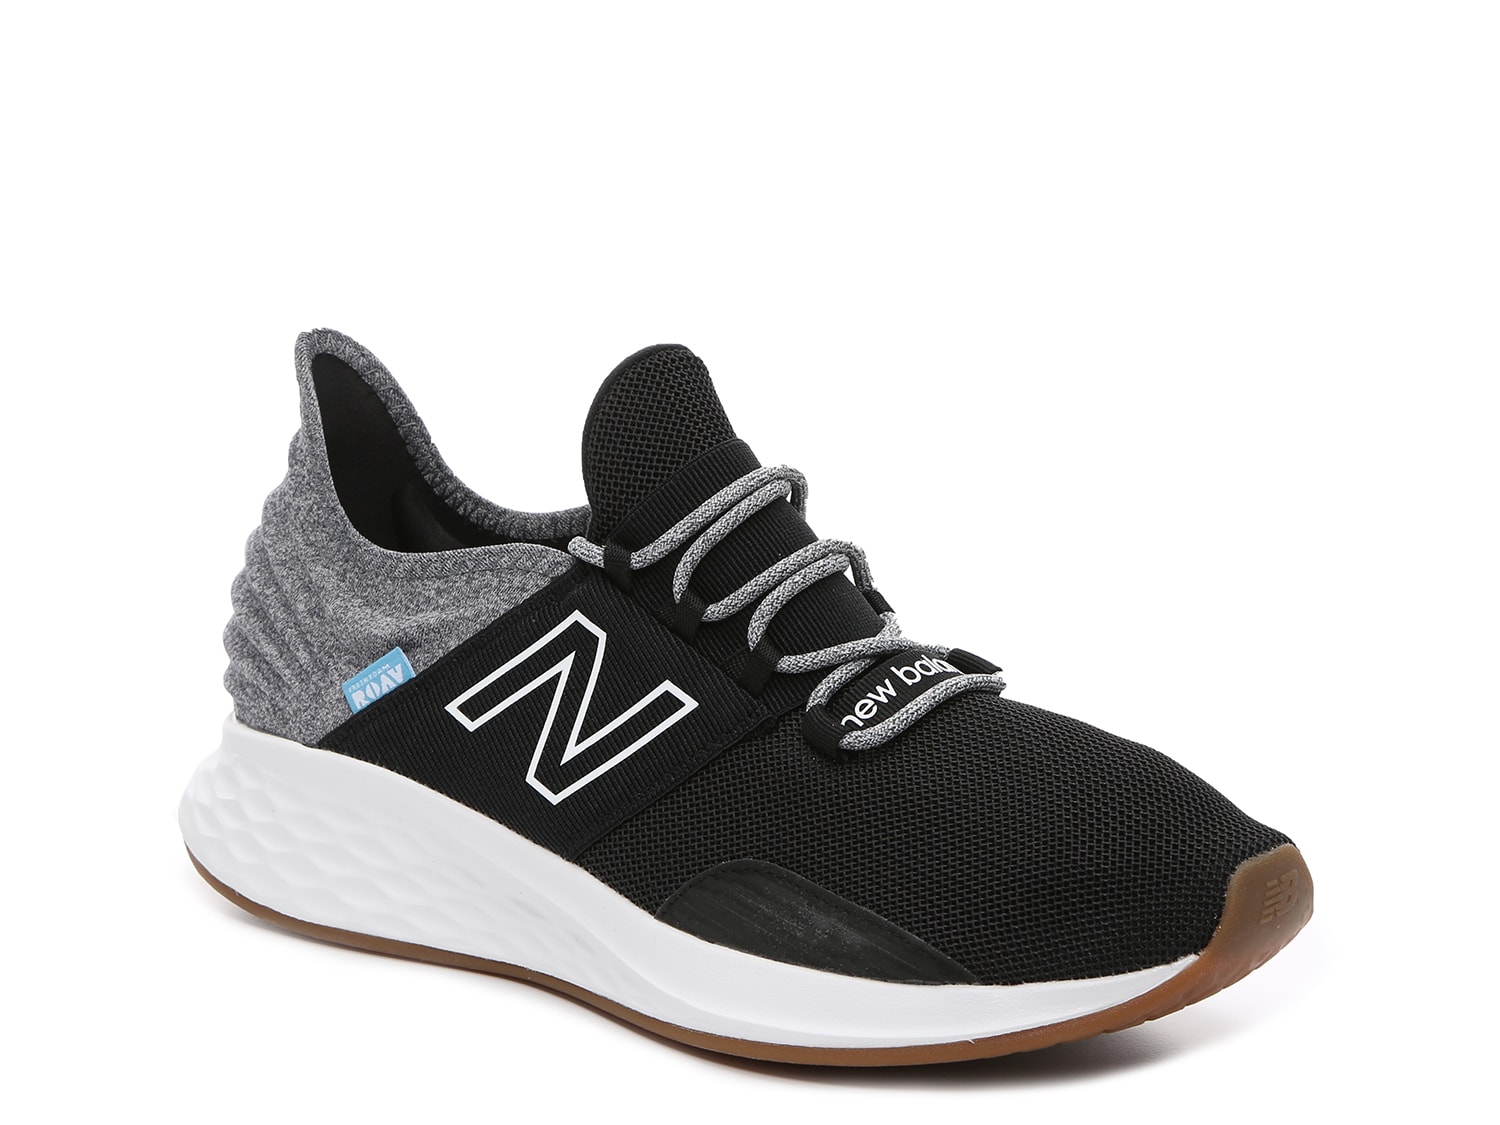 where can i find new balance shoes near me